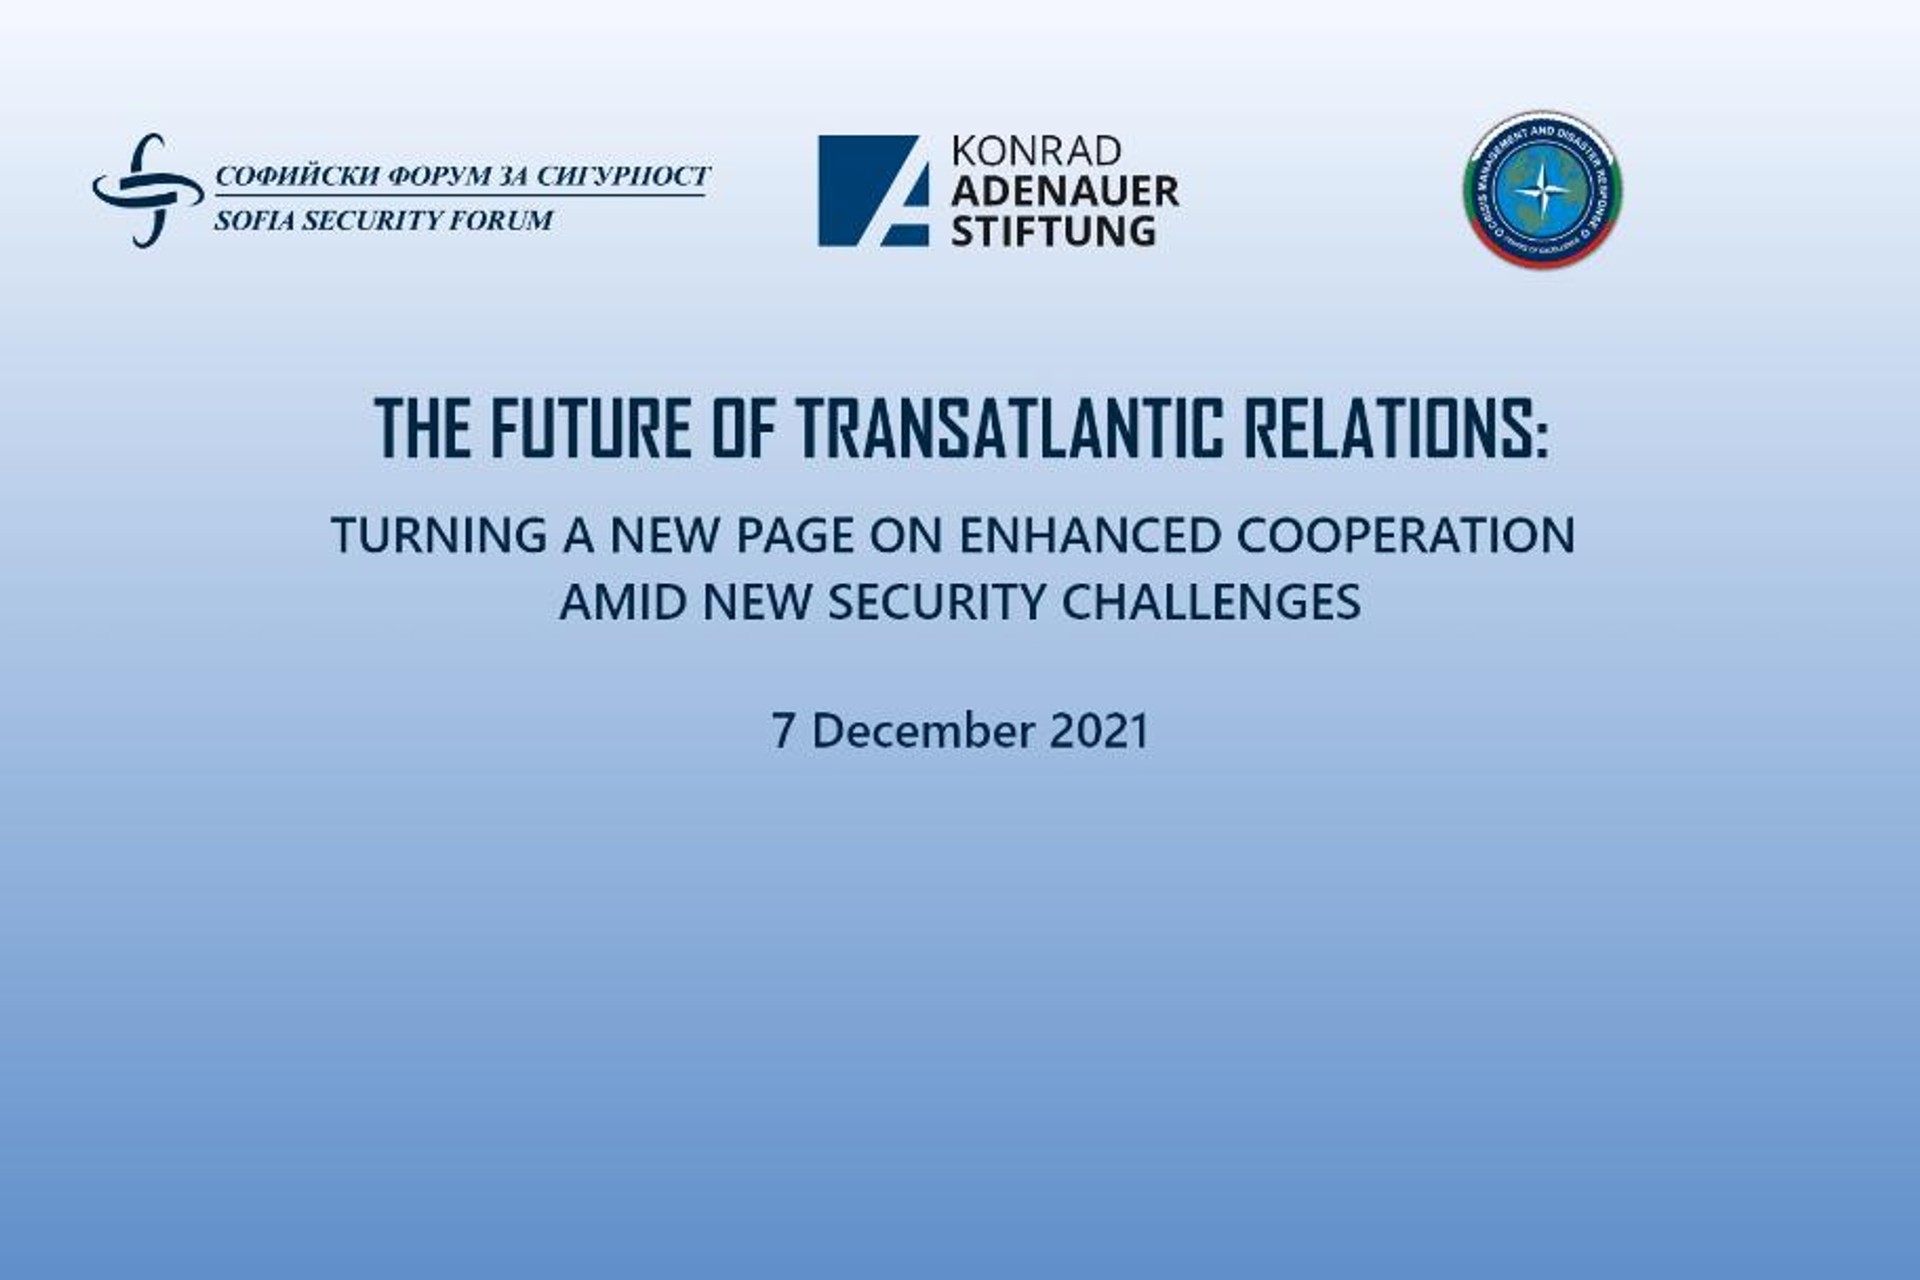 THE FUTURE OF TRANSATLANTIC RELATIONS: TURNING A NEW PAGE ON ENHANCED COOPERATION AMID NEW SECURITY CHALLENGES